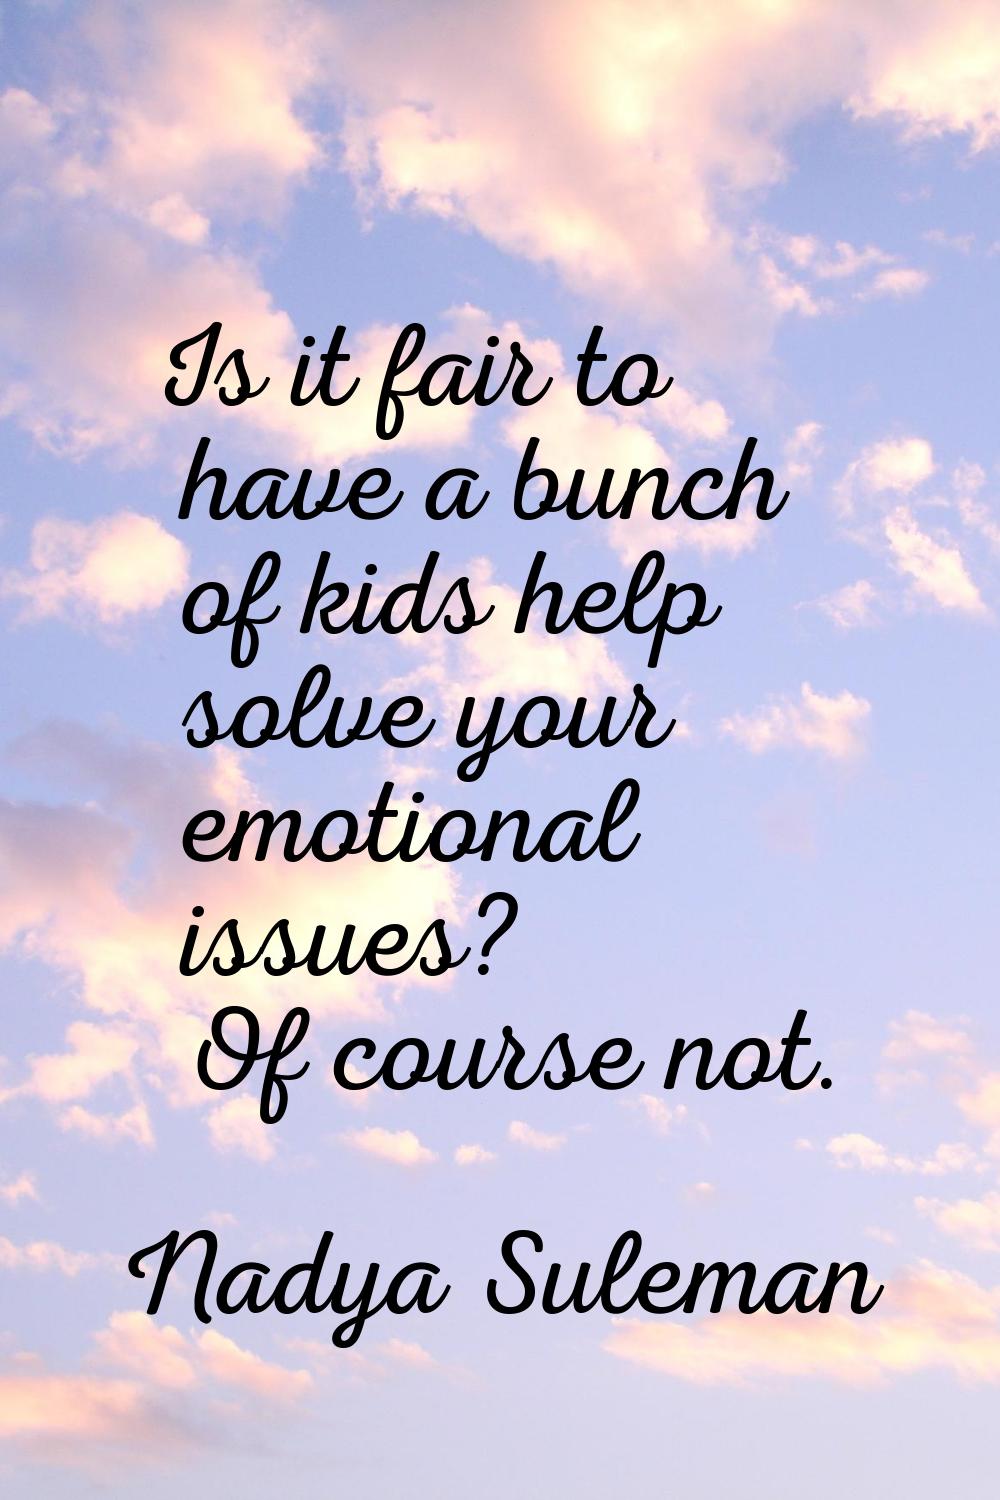 Is it fair to have a bunch of kids help solve your emotional issues? Of course not.